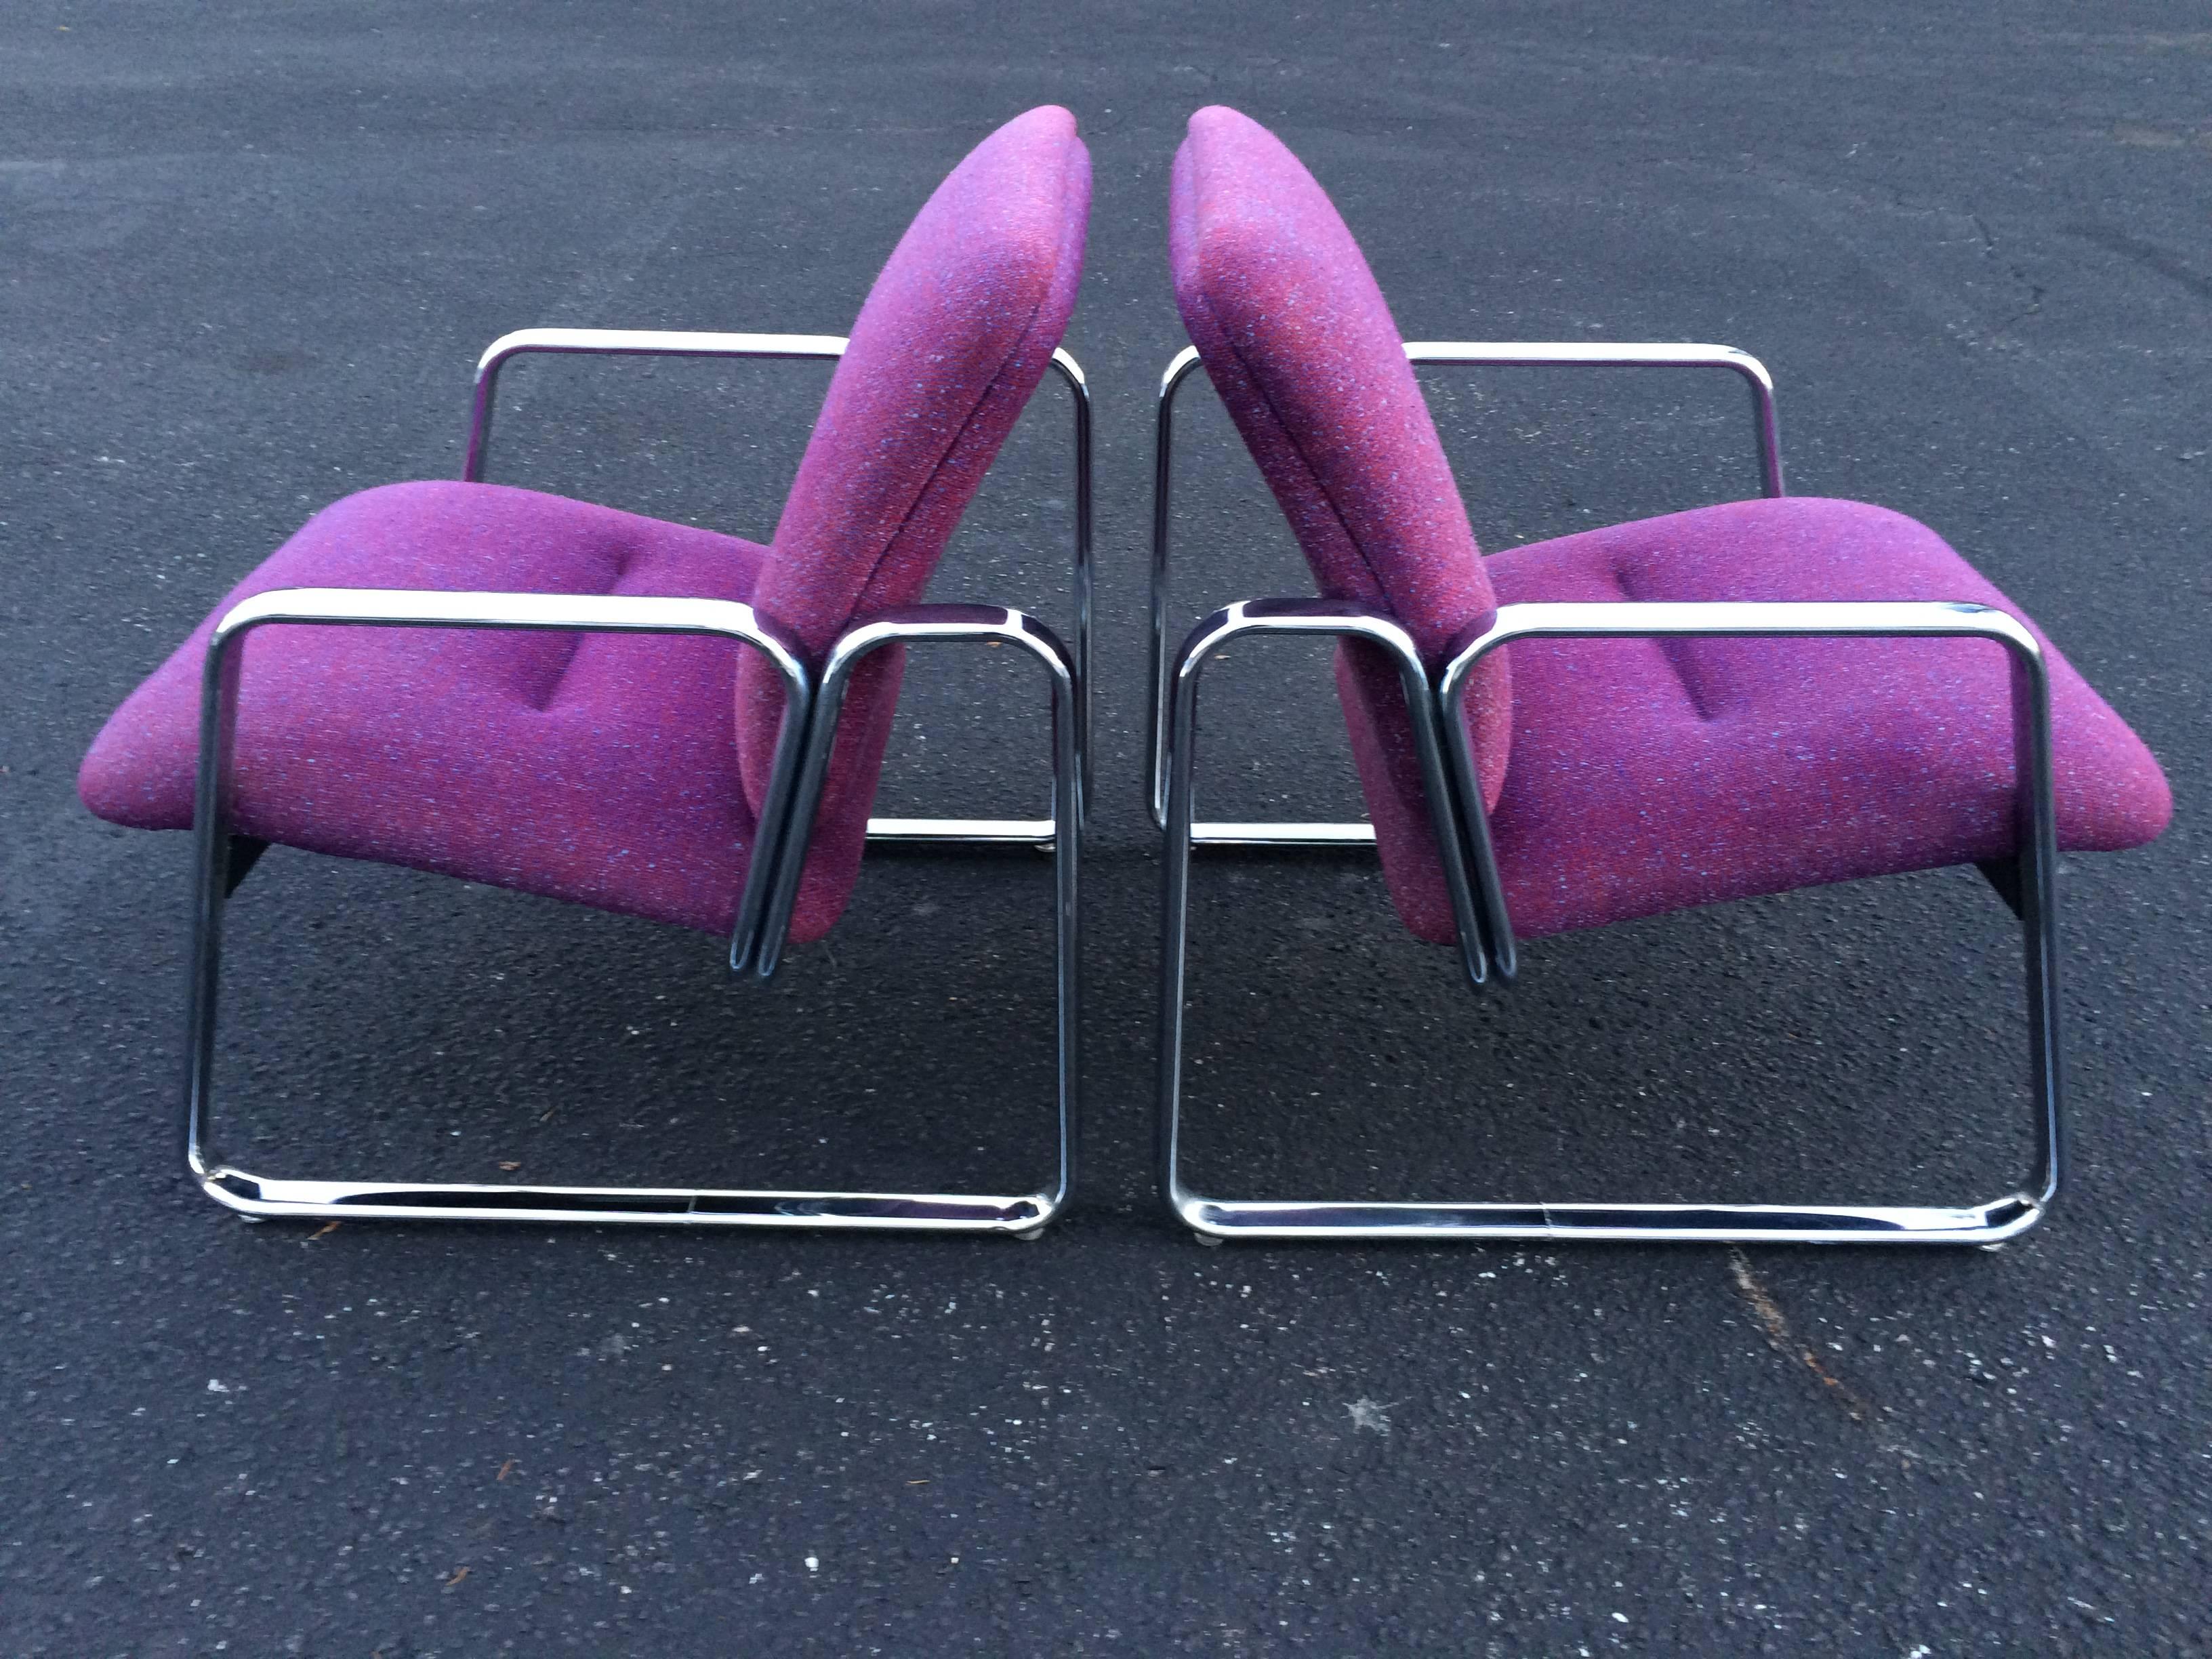 Pair of Chrome Steelcase Chairs in Violet For Sale 1